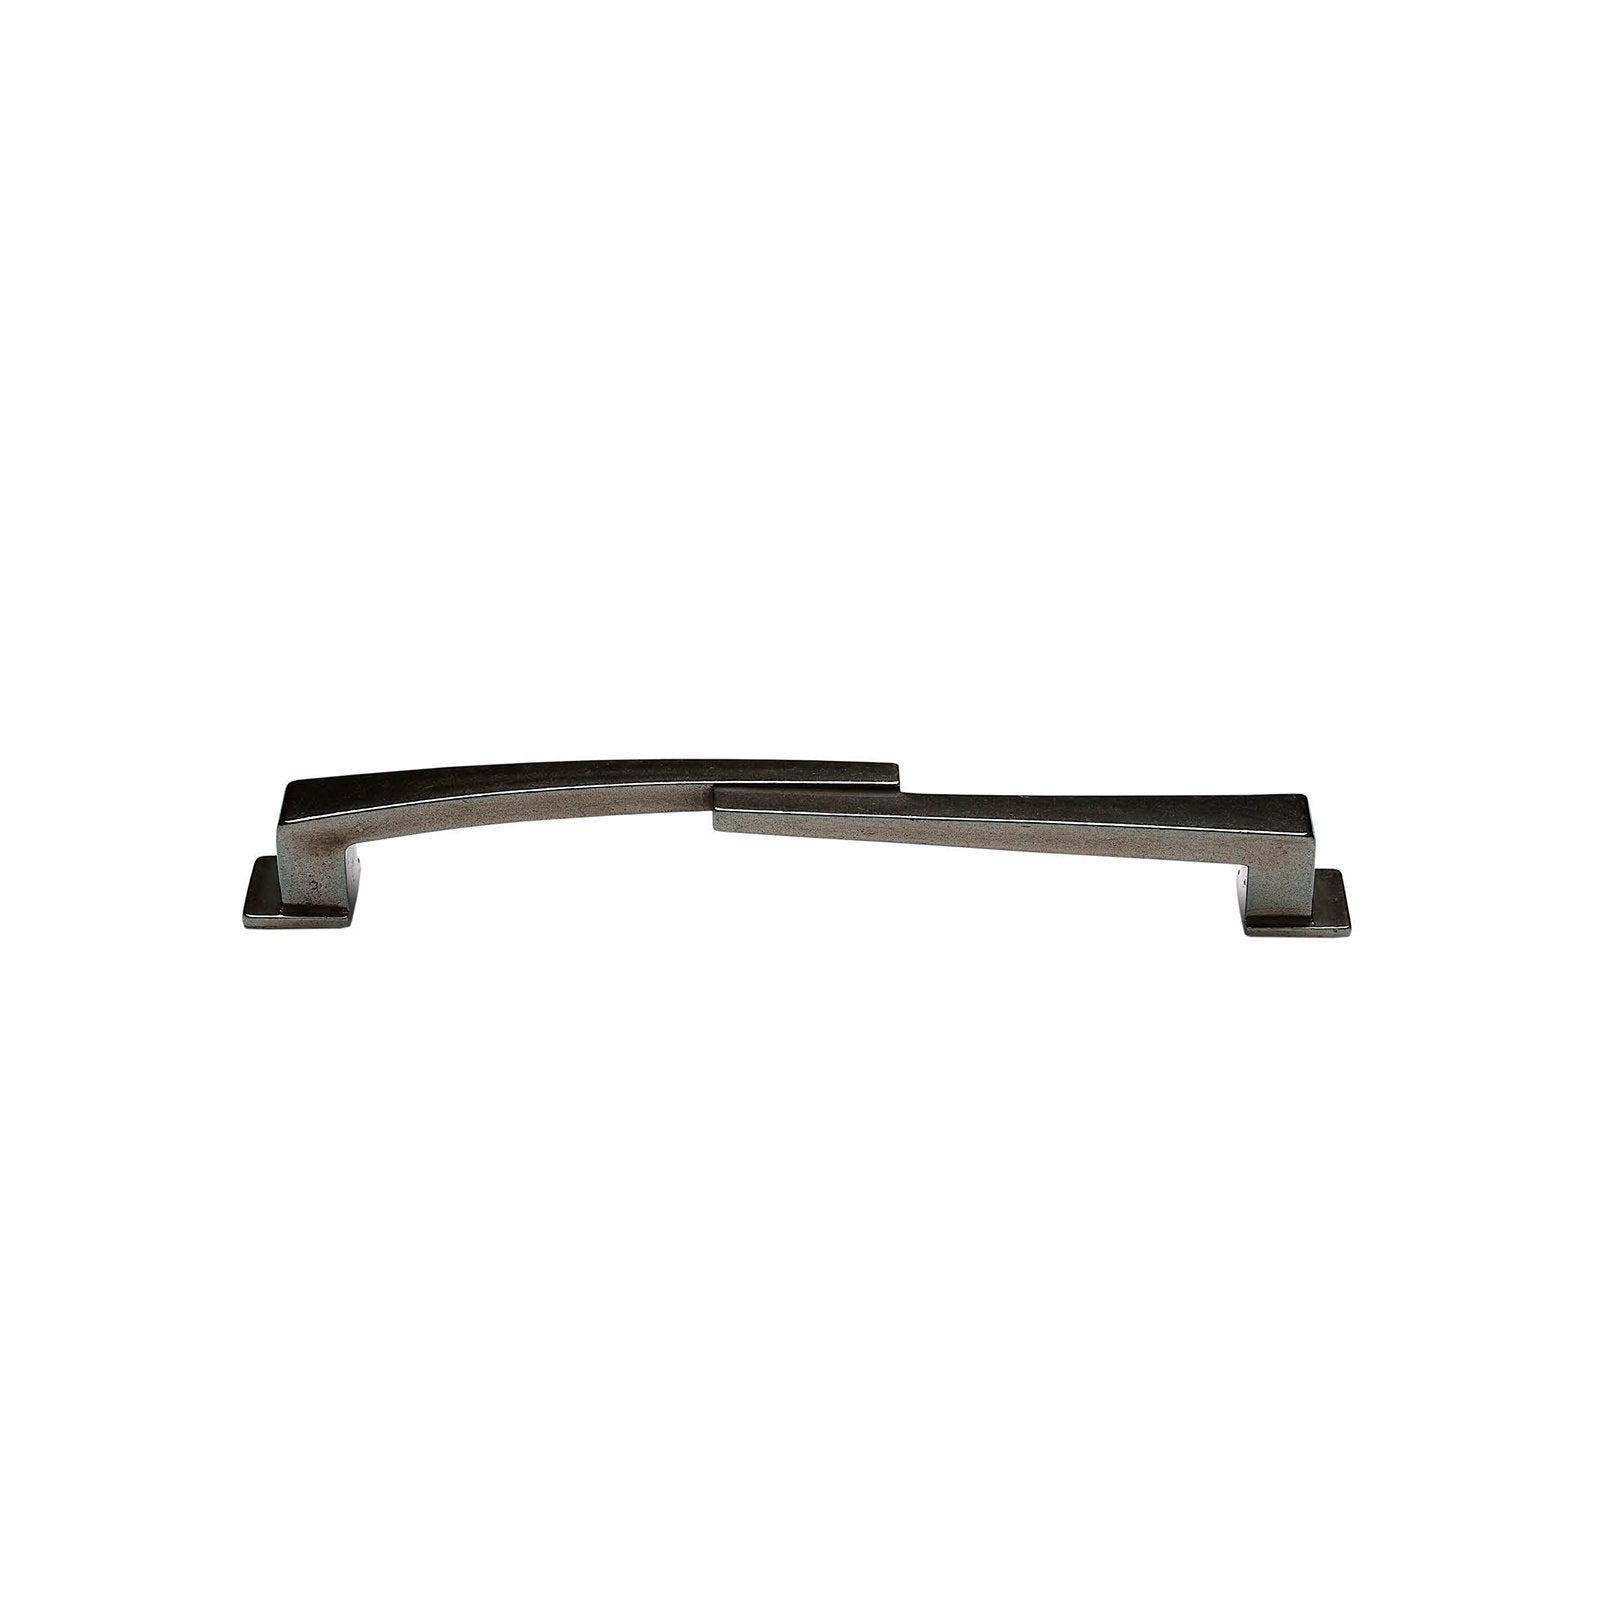 Rocky Mountain Hardware CK20196 - 10 1/2" C-to-C Shift Cabinet Pull